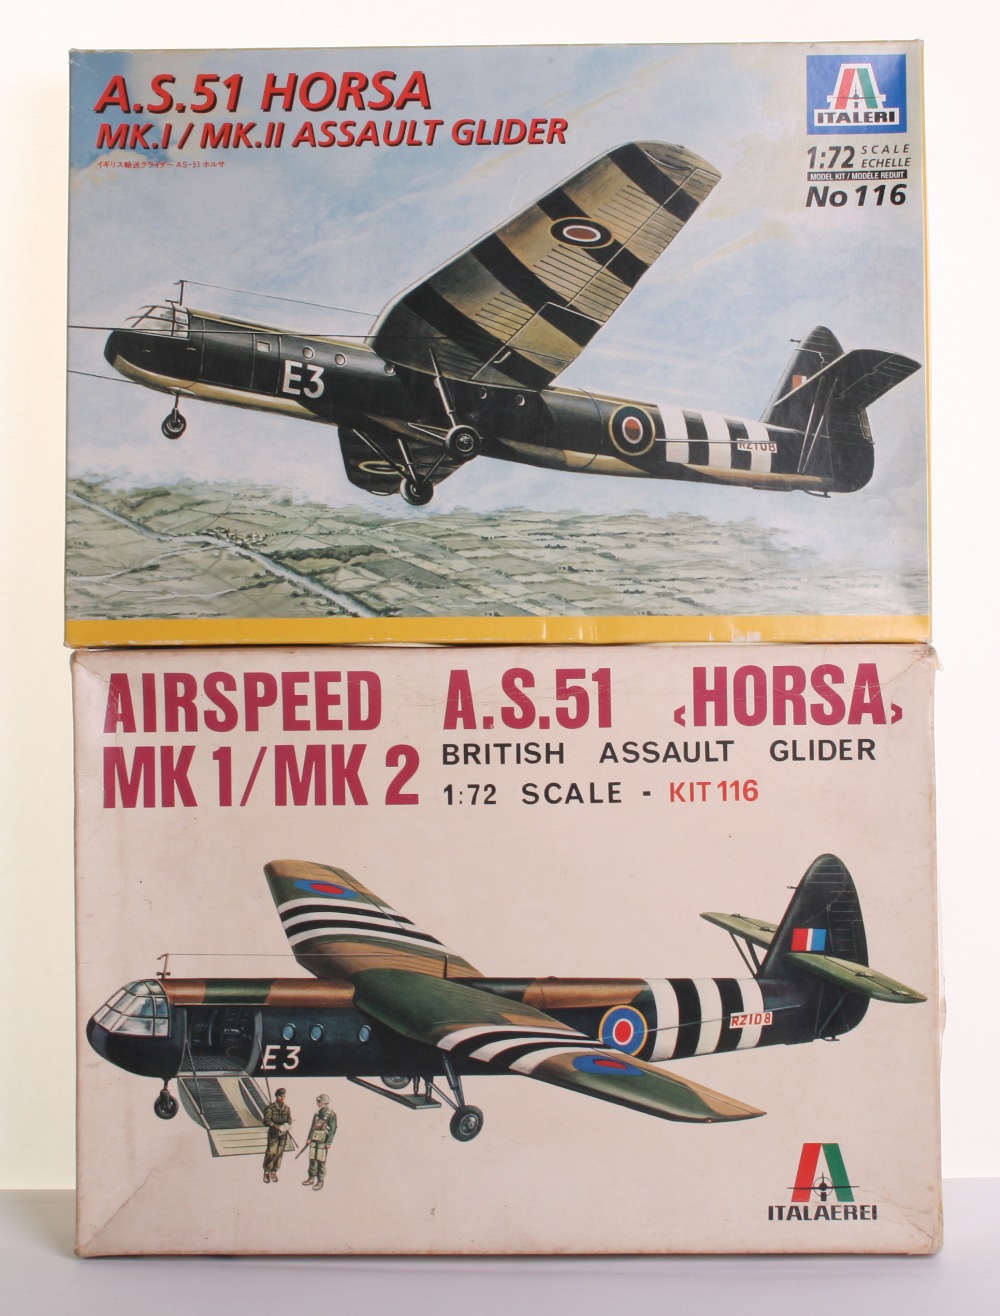 Two Italaerie 1:72nd Airspeed A.S.51 "HORSA" MK1/MK2 Assault Gliders No. 116 kits, 1st issue & 2nd